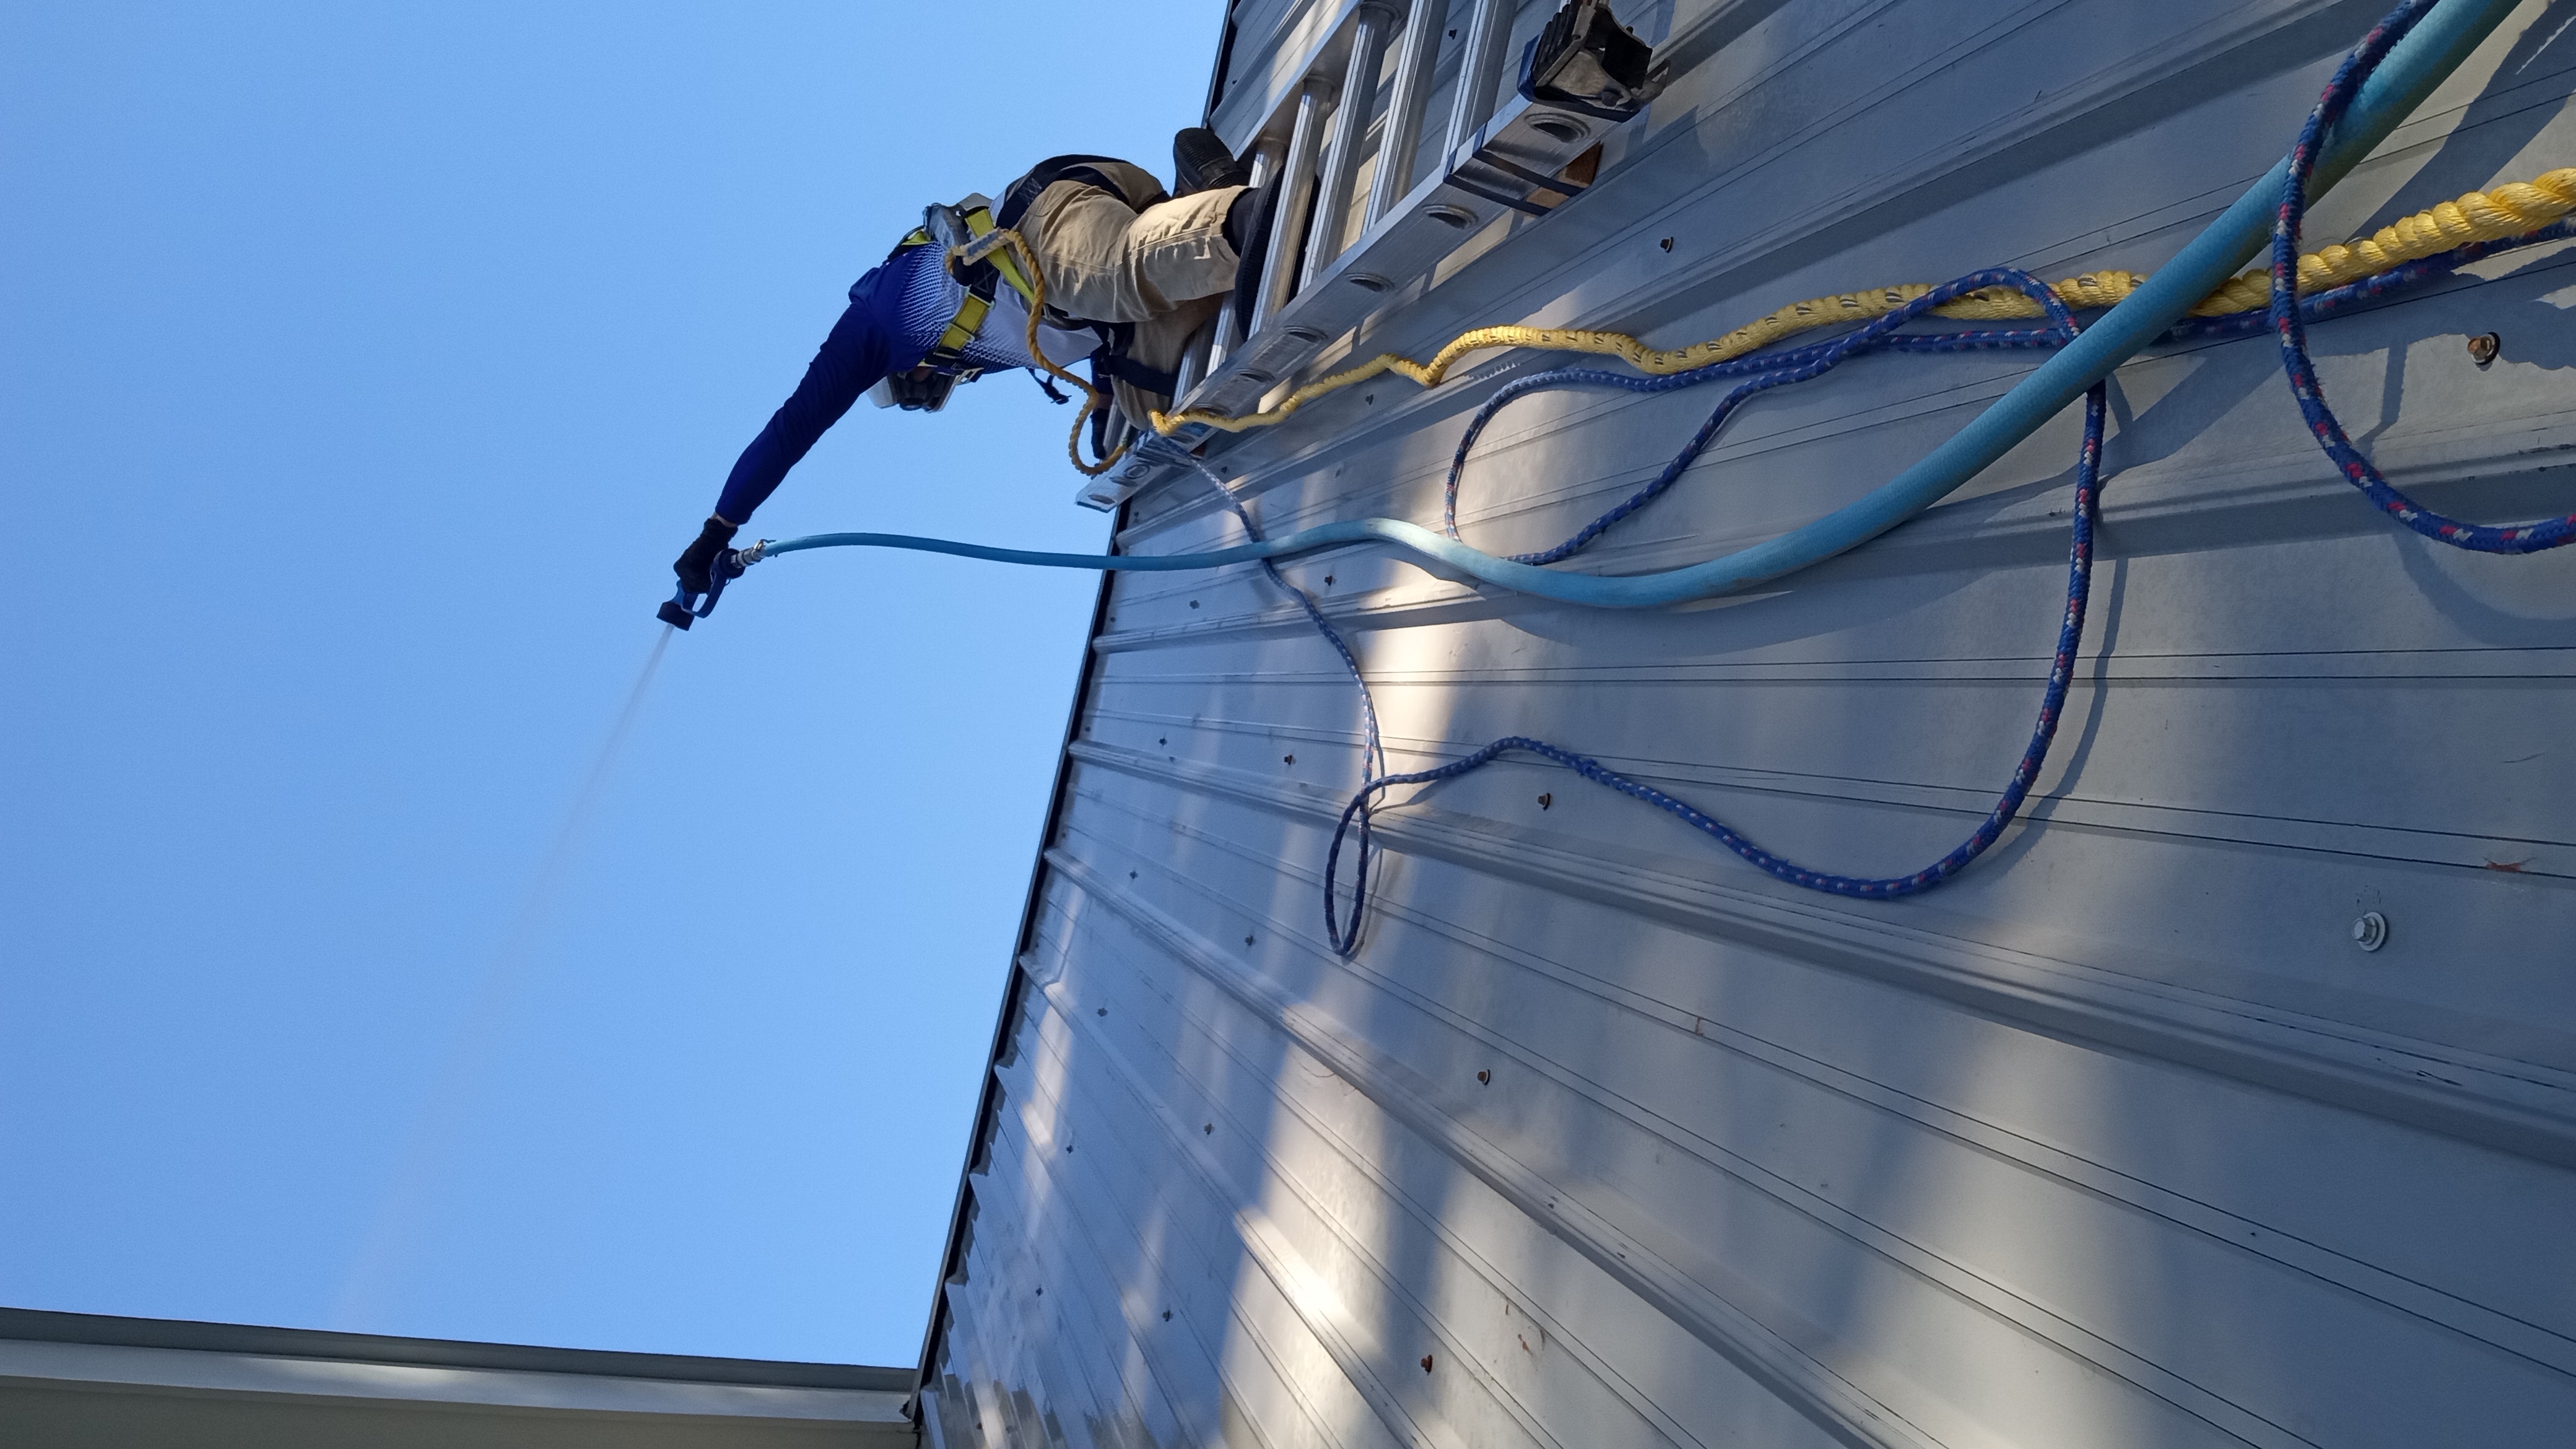 Crystal Clear Roof Renewal: Dahlonegas Premier Residential Roof Wash Service 